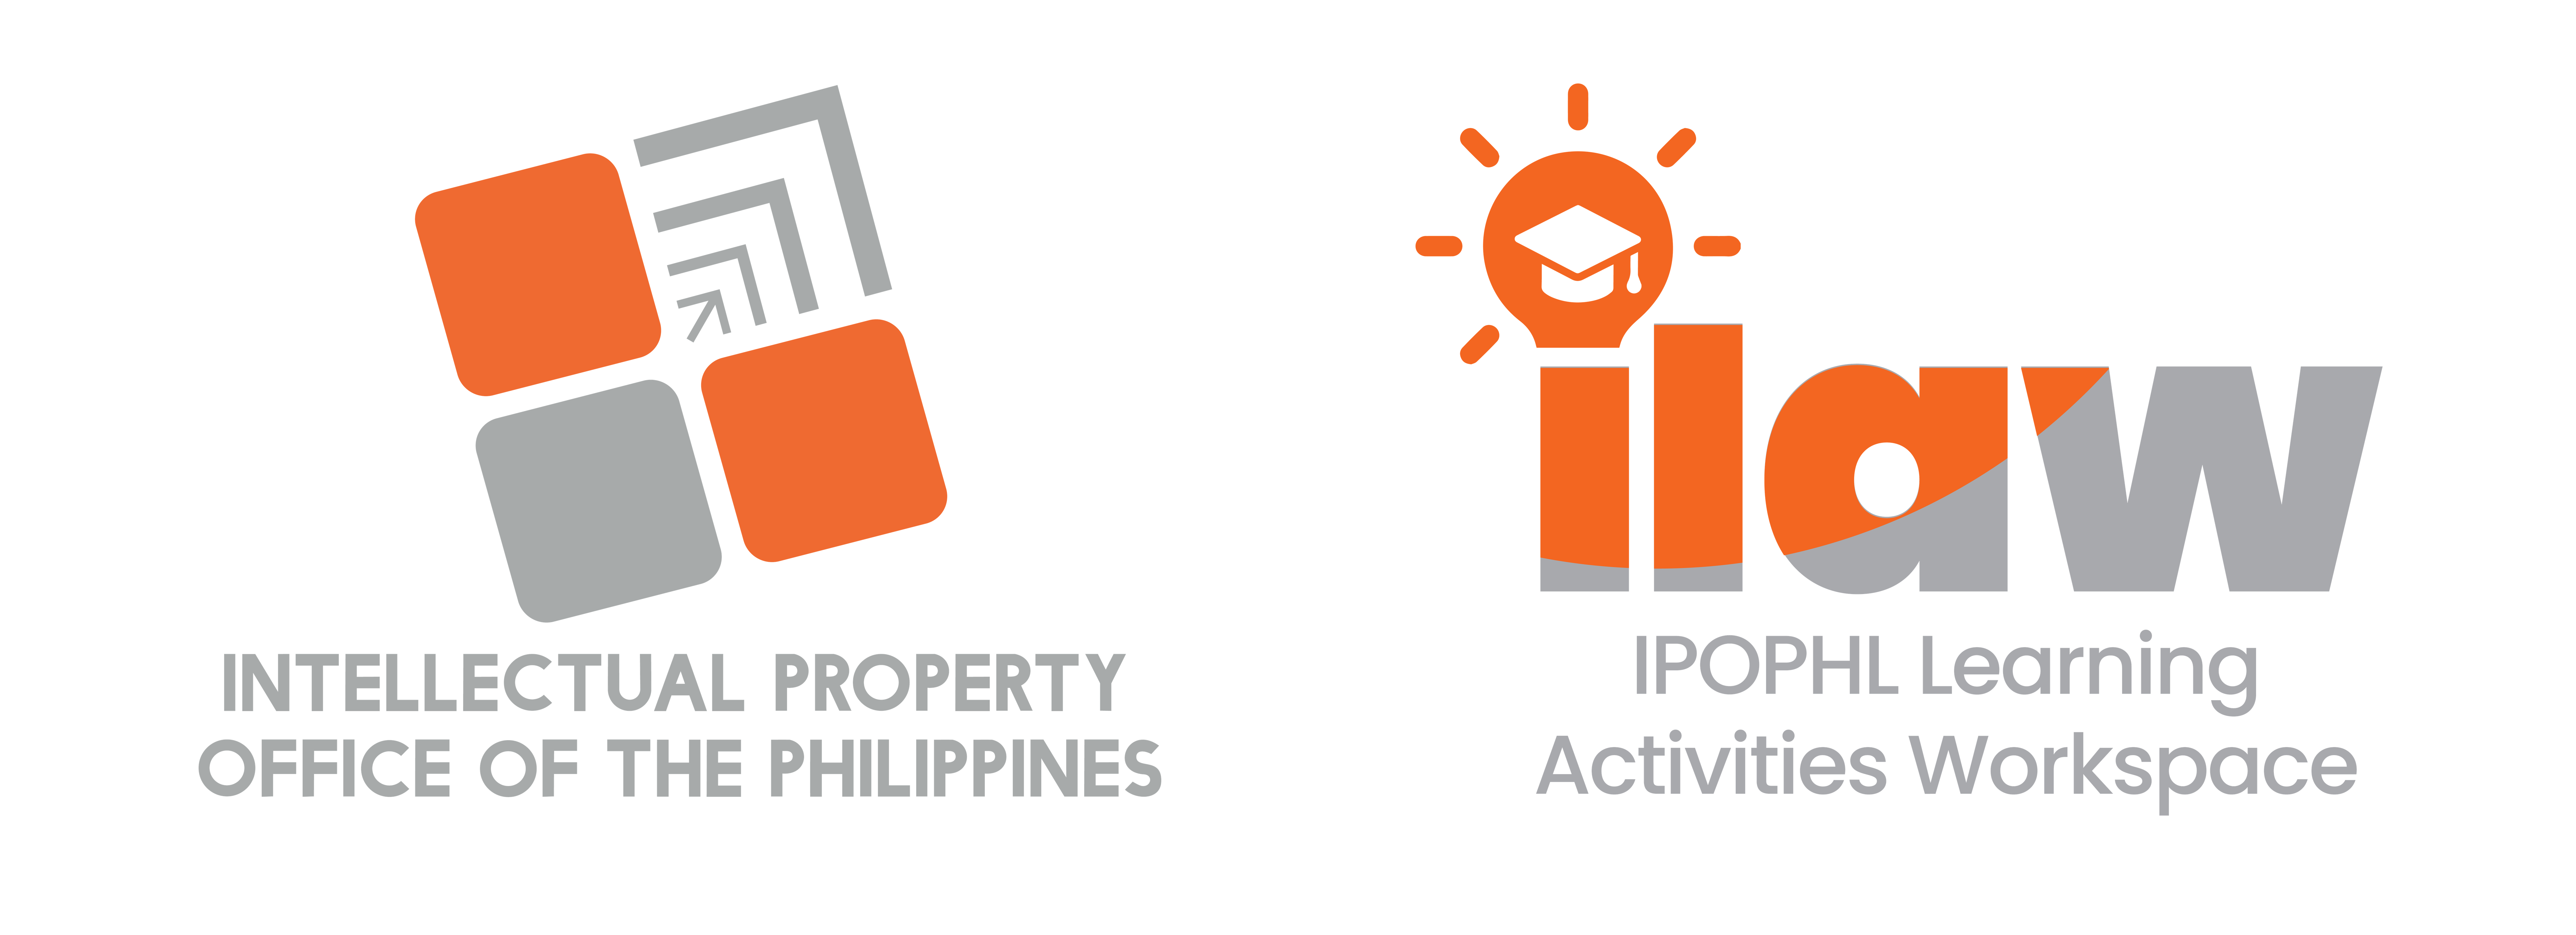 IPOPHL Learning Activities Workspace